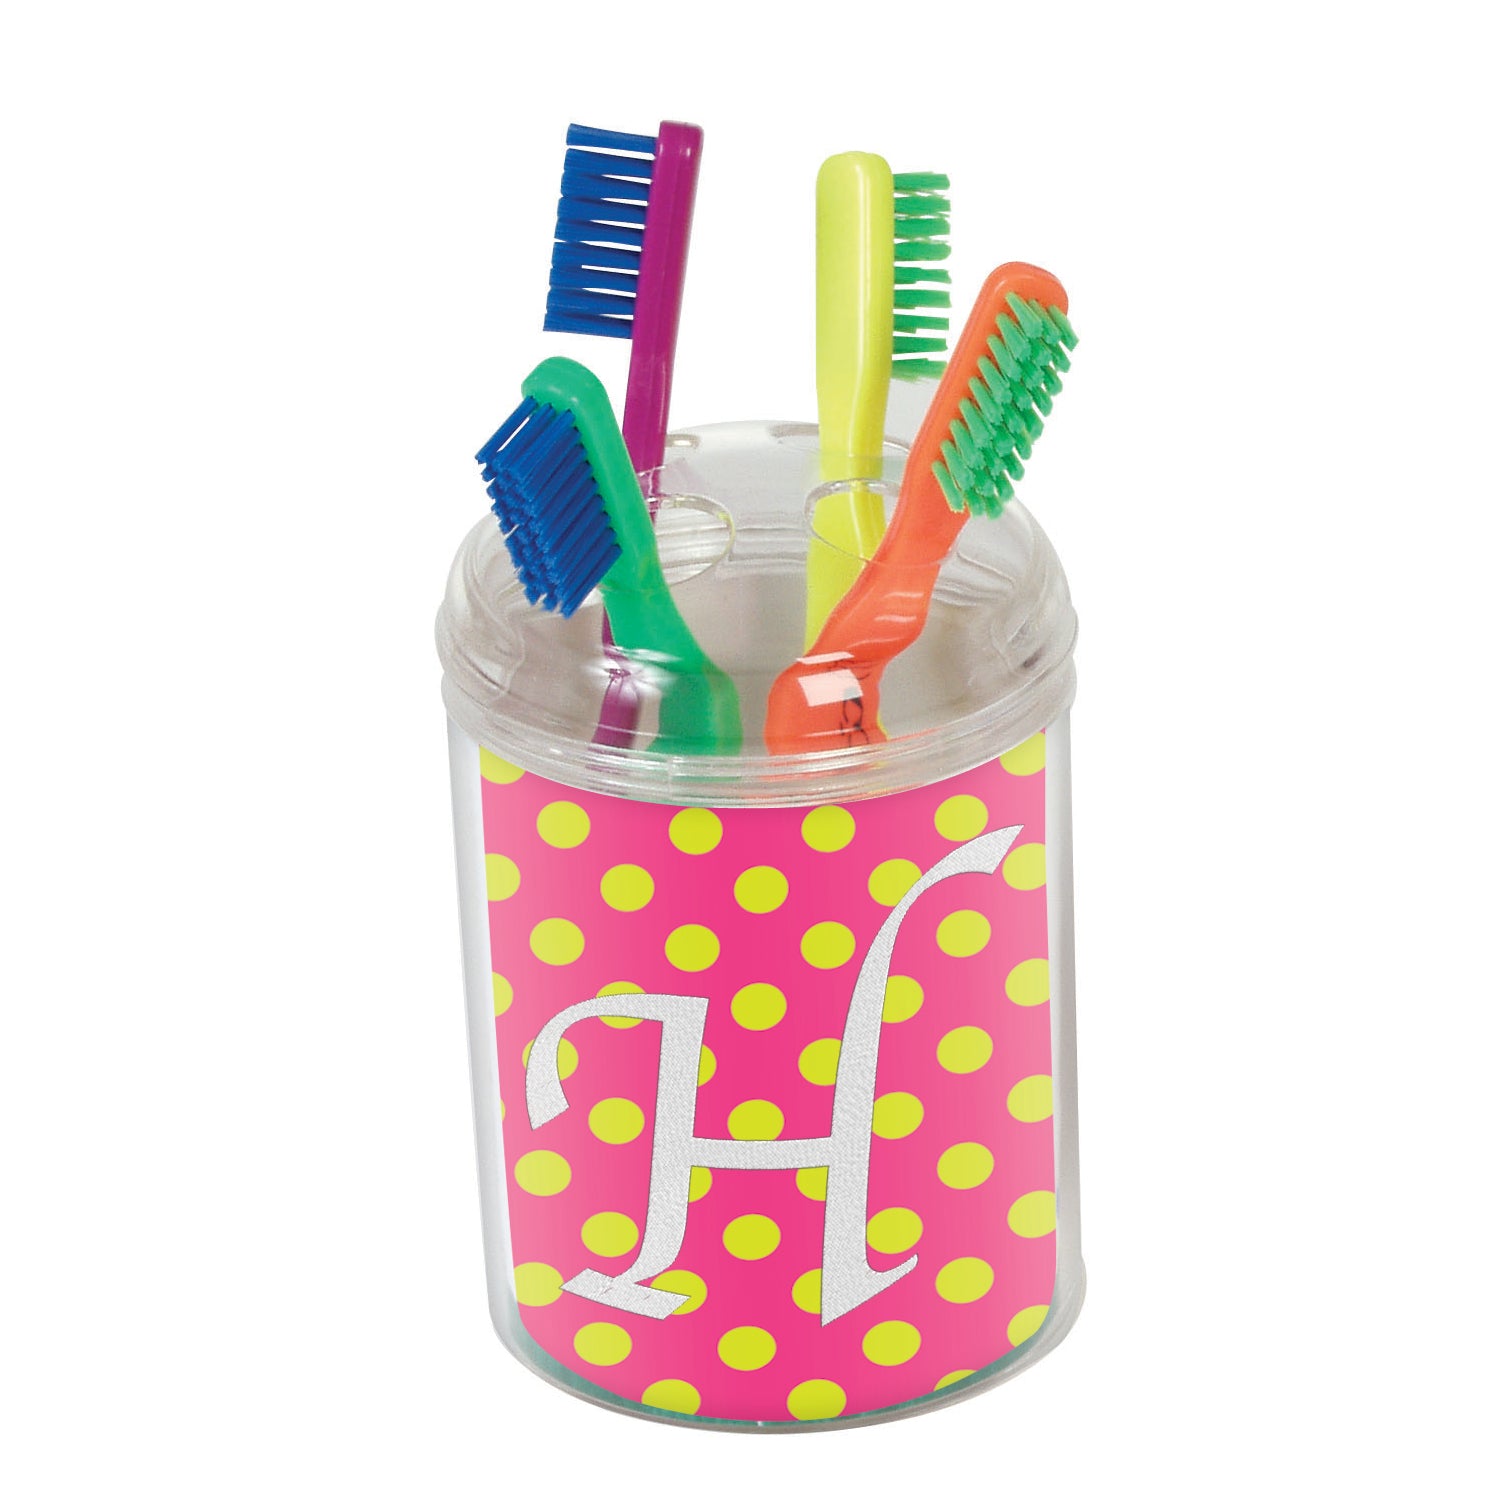 Create Your Own Toothbrush Holder